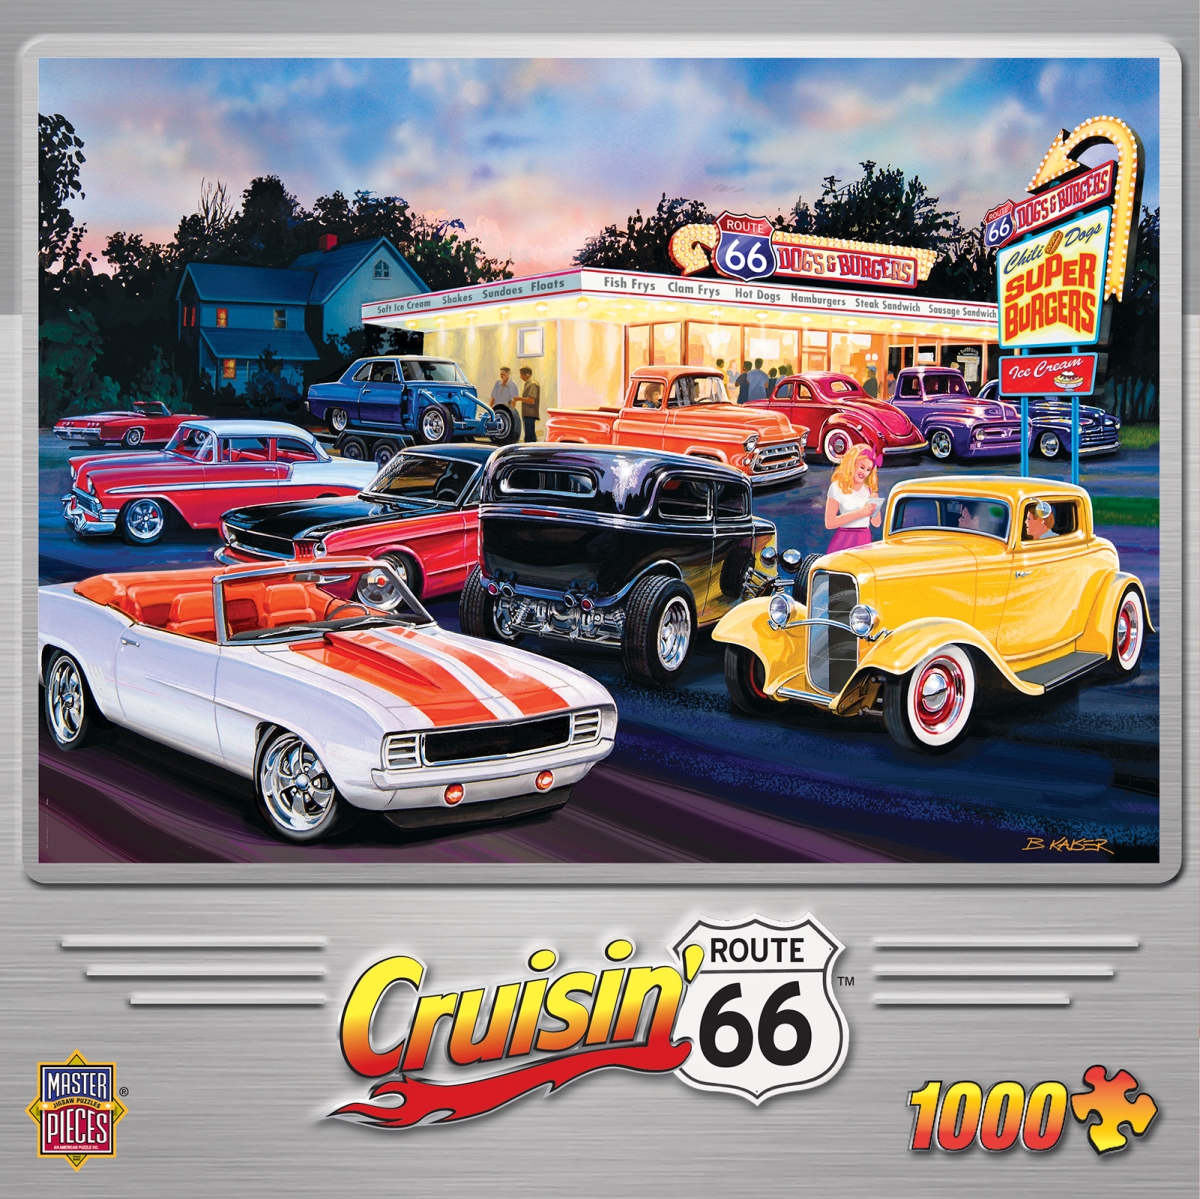 71765 19.25 X 26.75 In. Bruce Kaiser Cruisin Route 66 Dogs & Burgers Jigsaw Puzzle - 1000 Piece